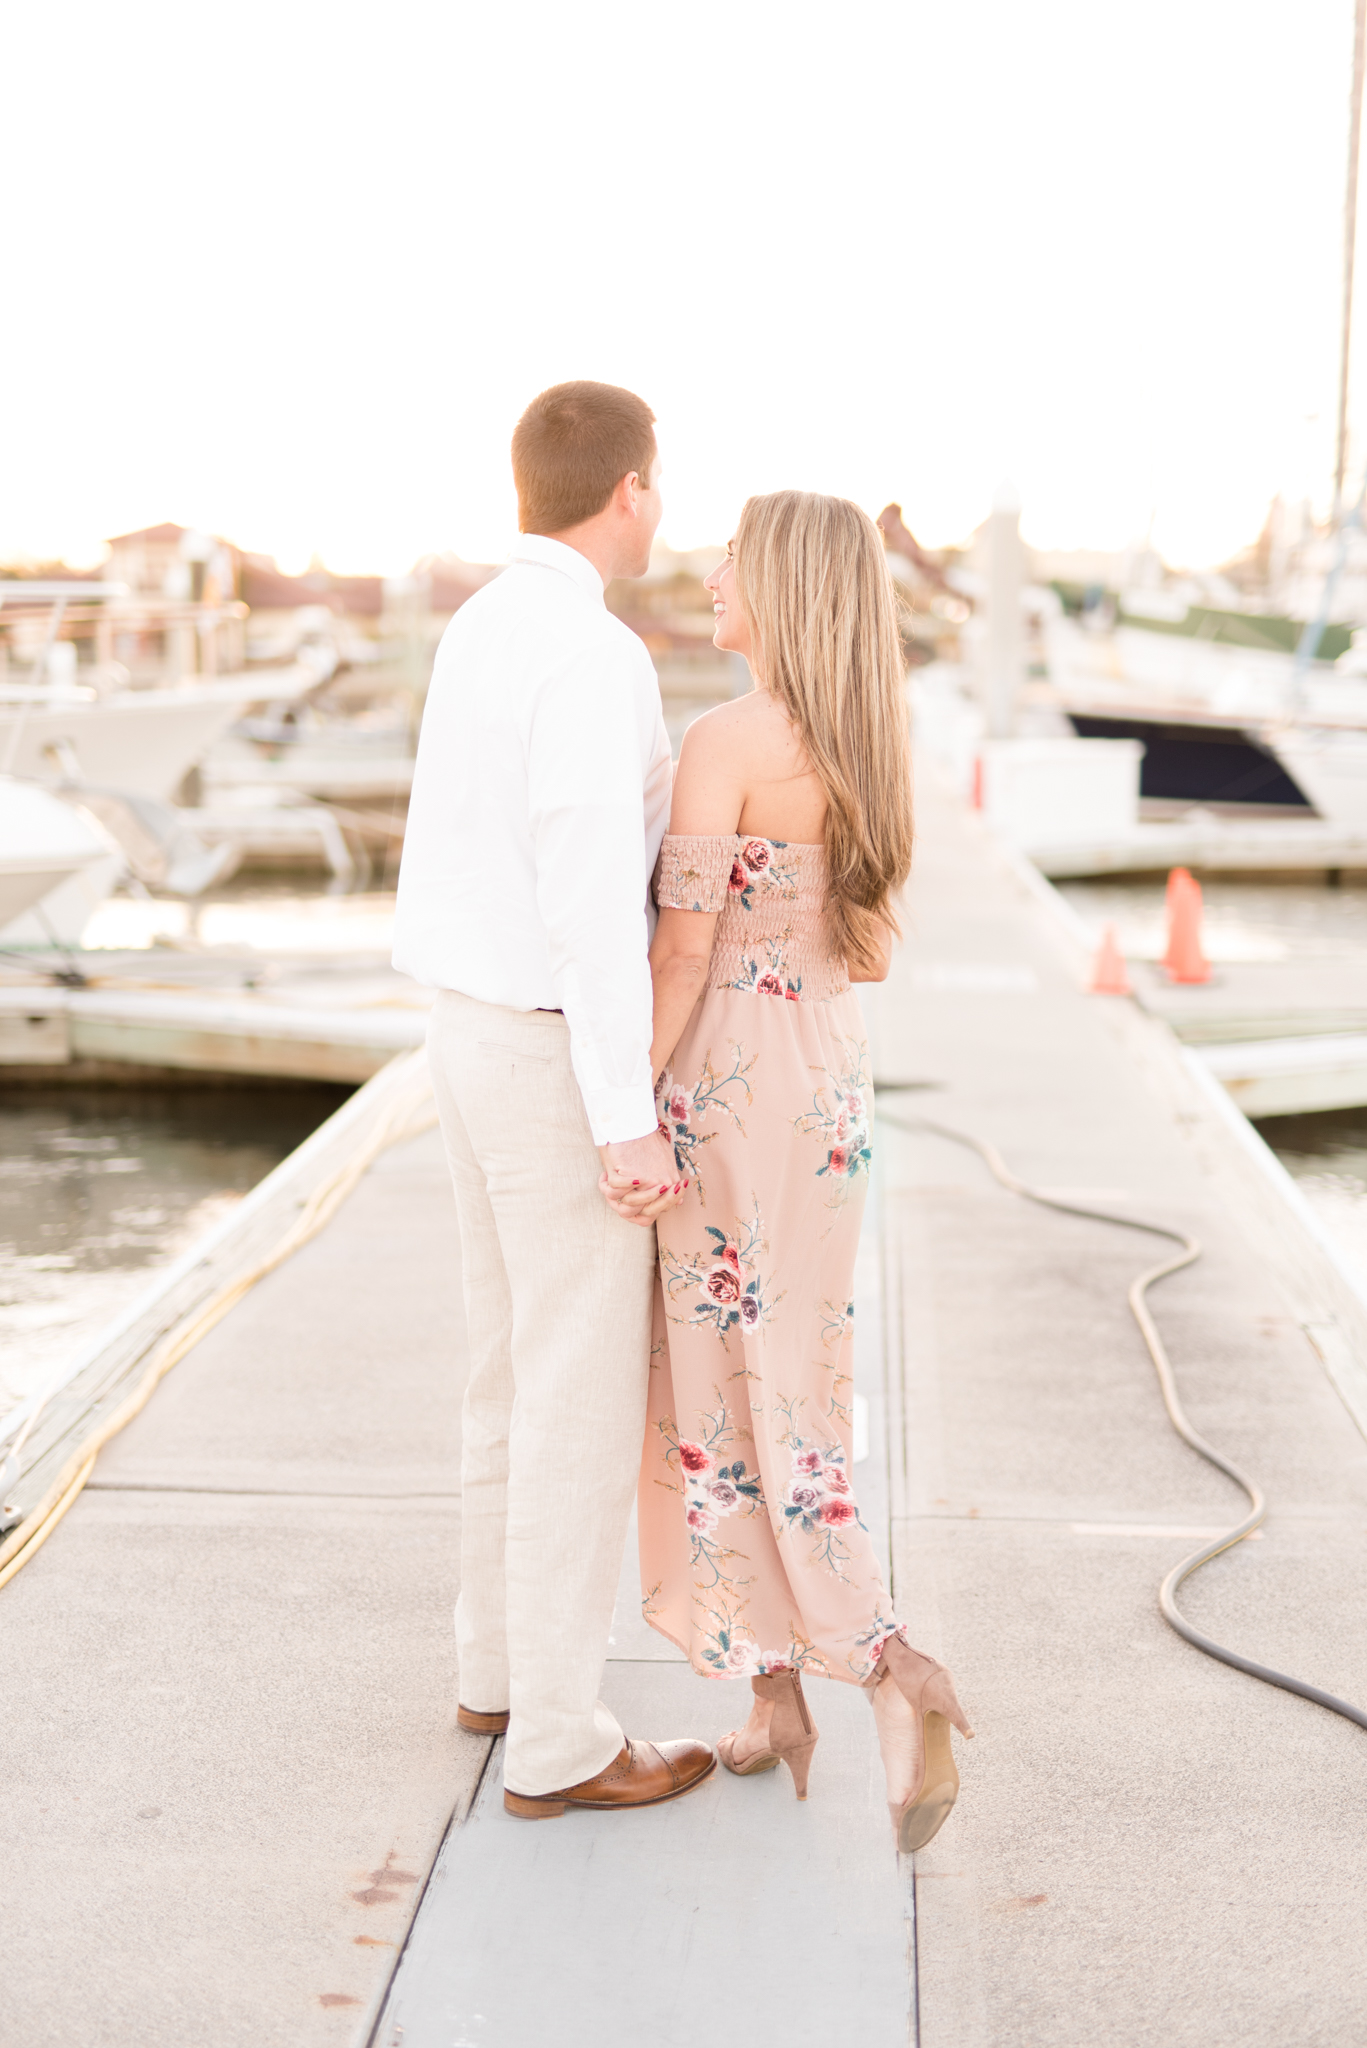 Married couple stands on a dock.